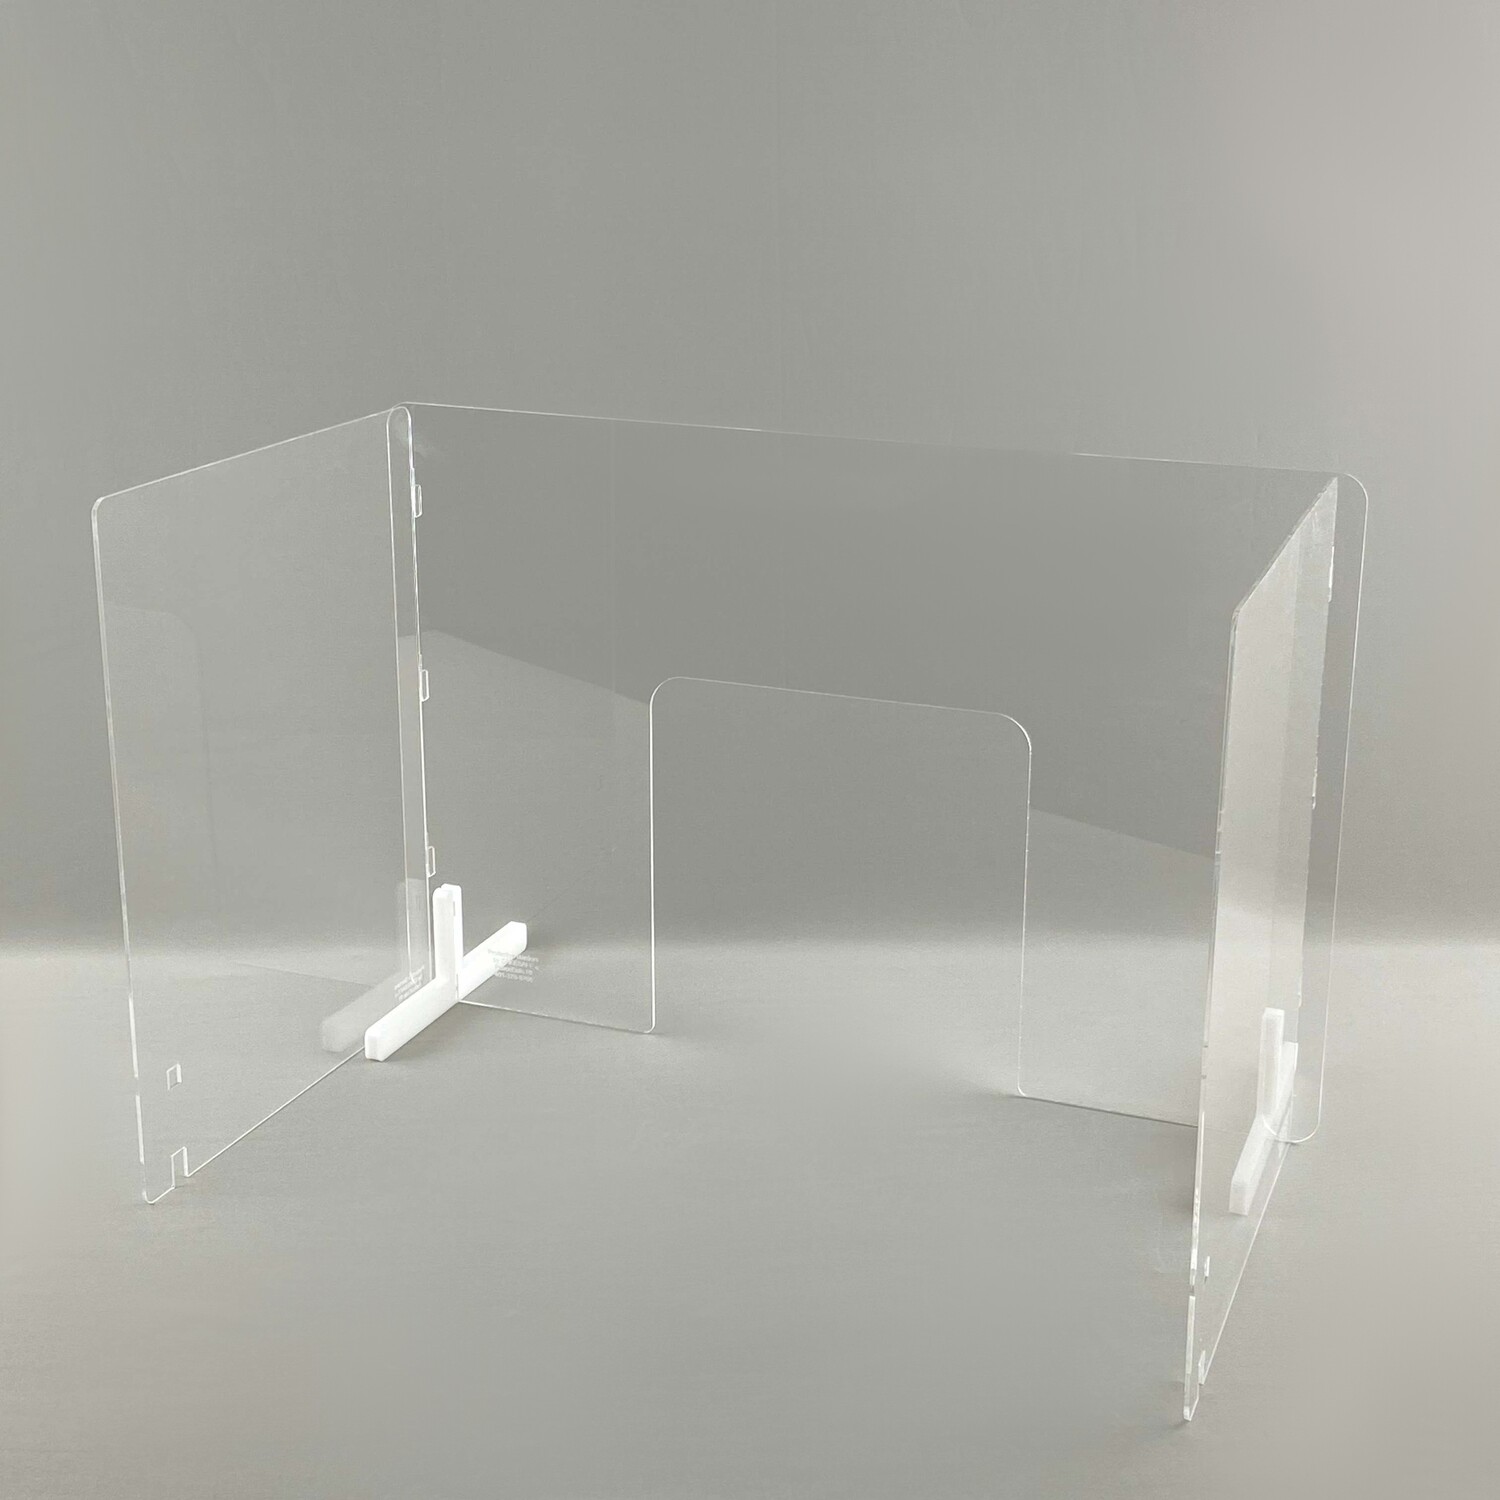 30 x 20 inch Free Standing Acrylic Barrier with Side Panels & 12"x 12" Cutout